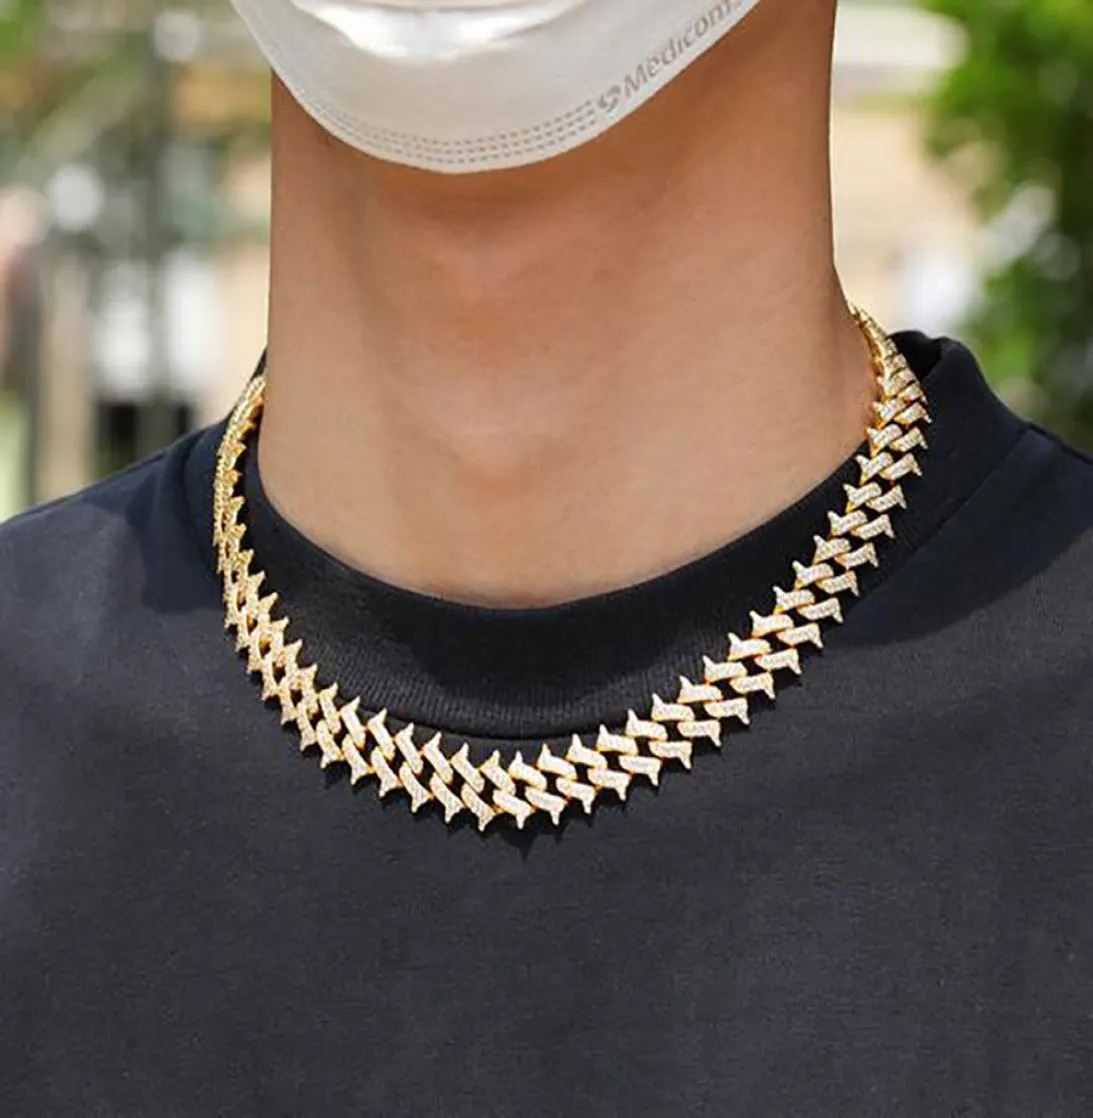 Men's 14k Gold Plated 16mm Spike Chain Iced Fin Hip Hop Necklace Miami Box Clasp Cuban Chain Cubic Zircon Bling Hip hop Jewelry9557355